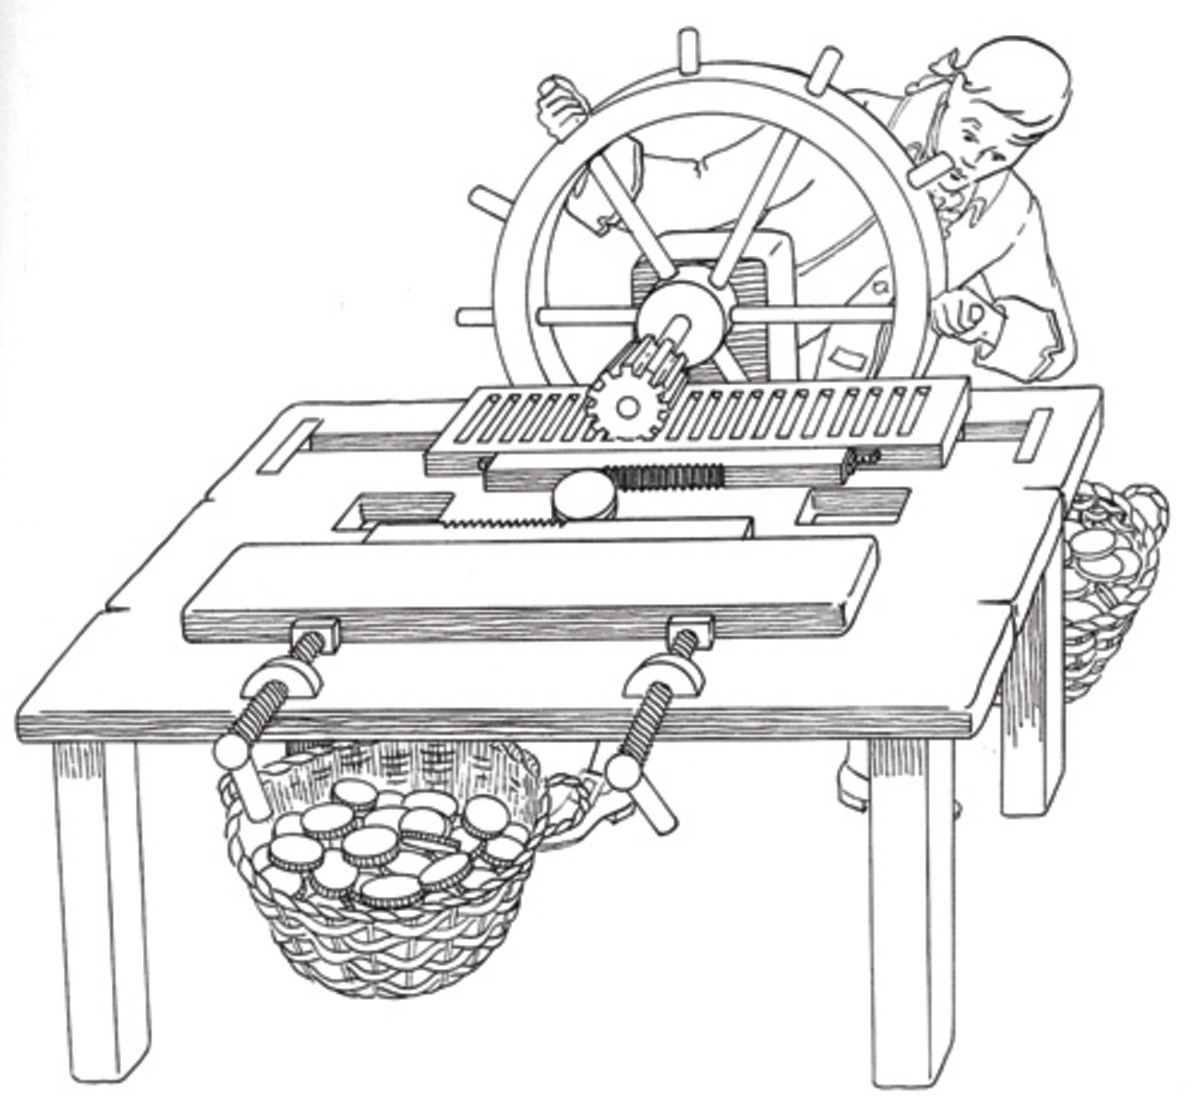  Operation of the upsetting mill showing a blank being pressed between two edge dies. This is the job William Ward performed on all or nearly all of the blanks used in 1793. Image from Don Taxay, “The U.S. Mint and Coinage,” ARCO Publishing, NY, 1966. Adapted from “An Essay on Coining” by Samuel Thompson, 1783.